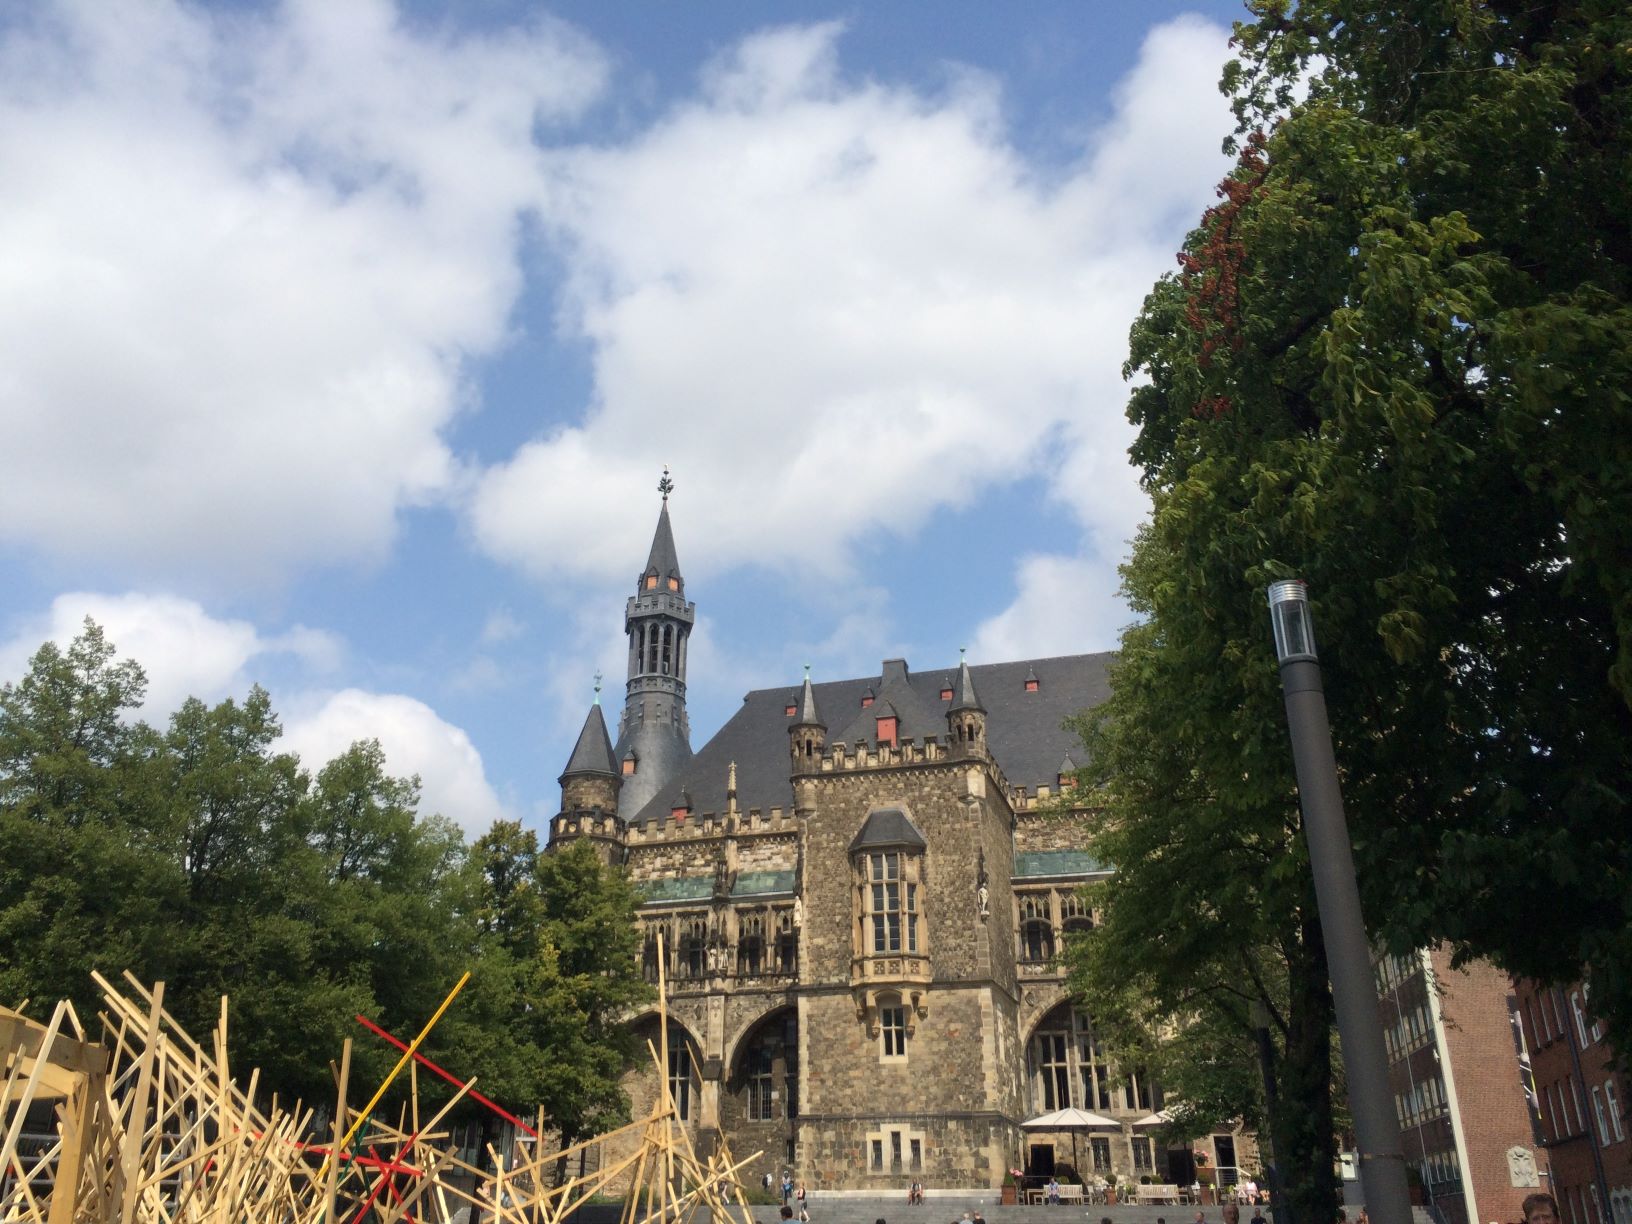 A view of Aachen's Rathaus and some art